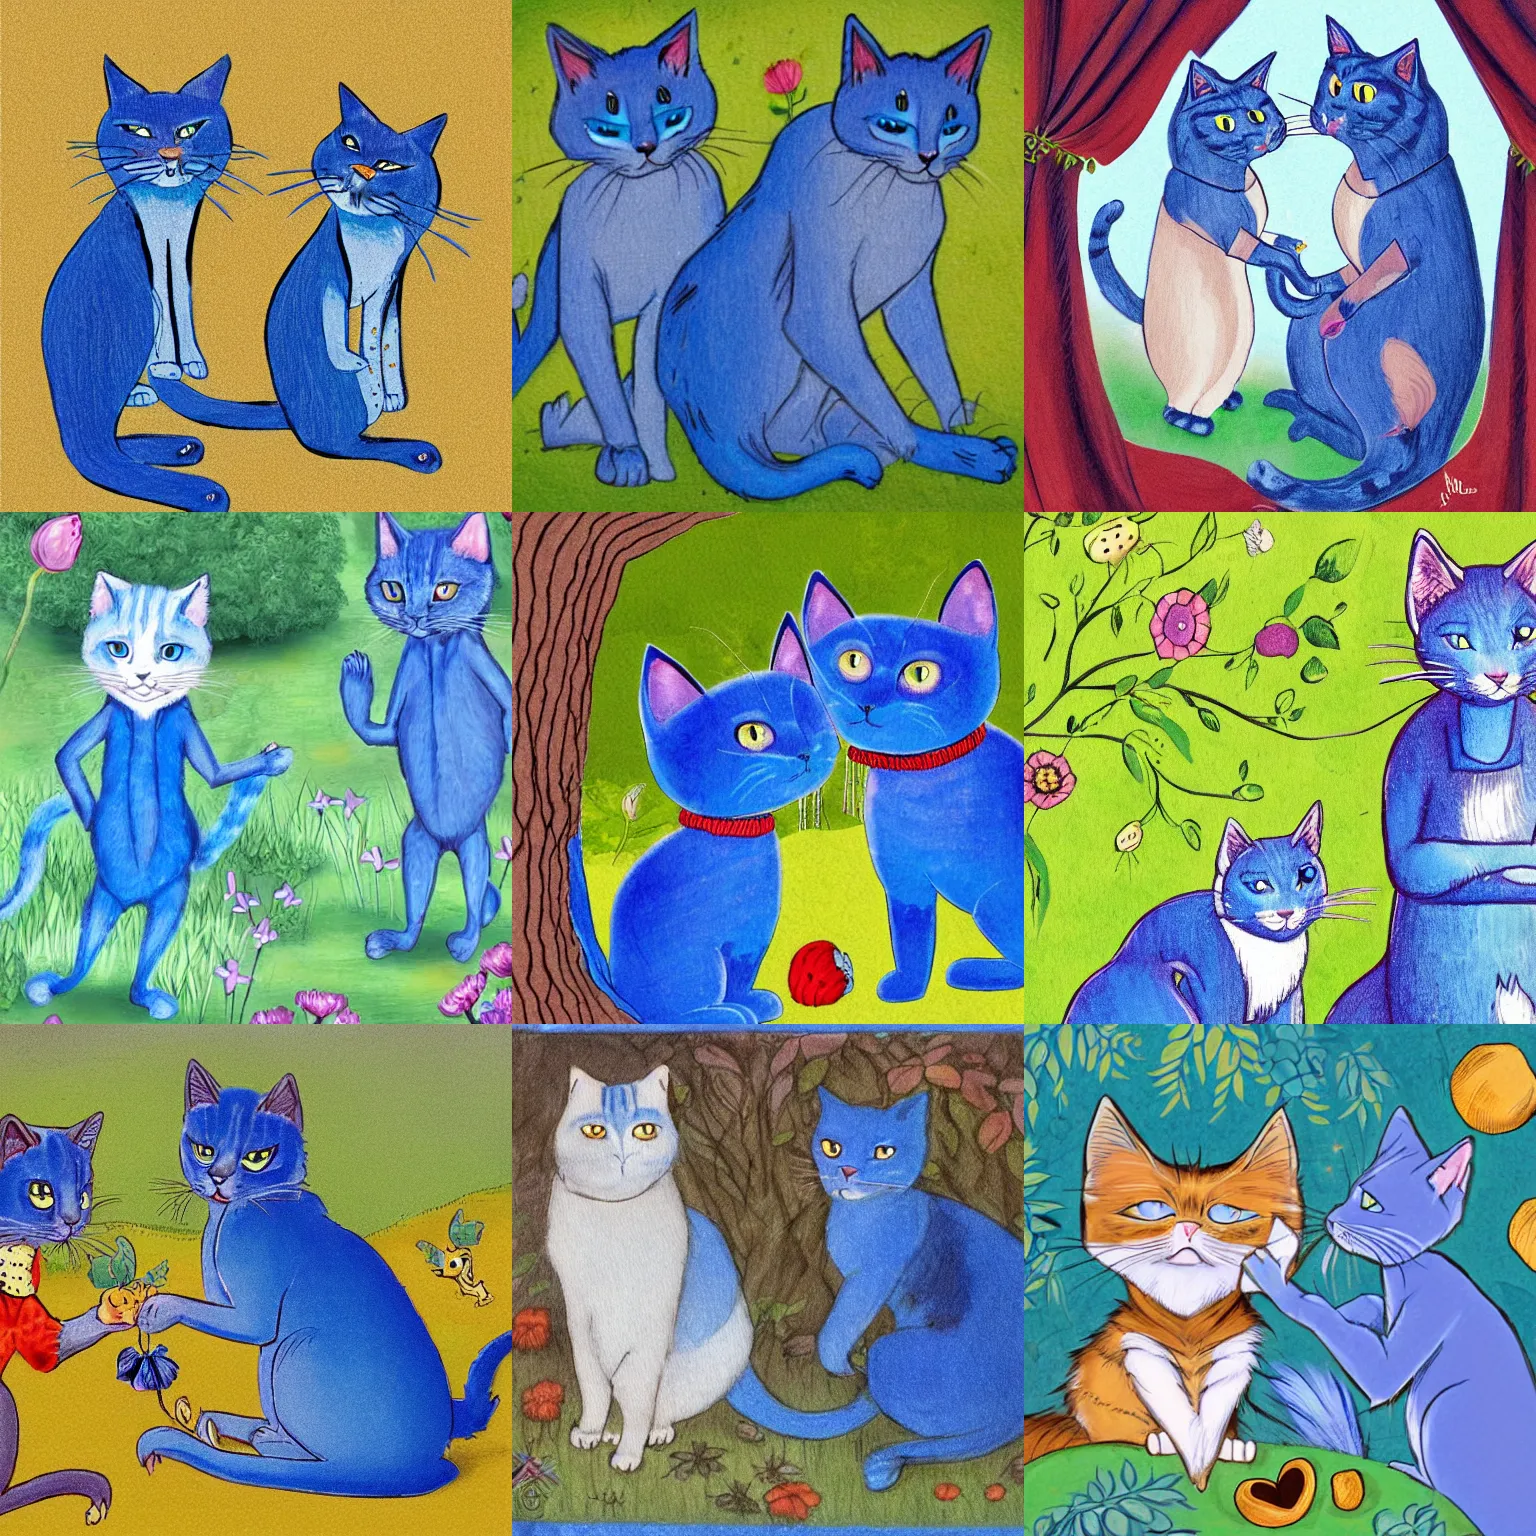 Prompt: storybook illustration of a pair of blue cats in the style of alice in wonderland